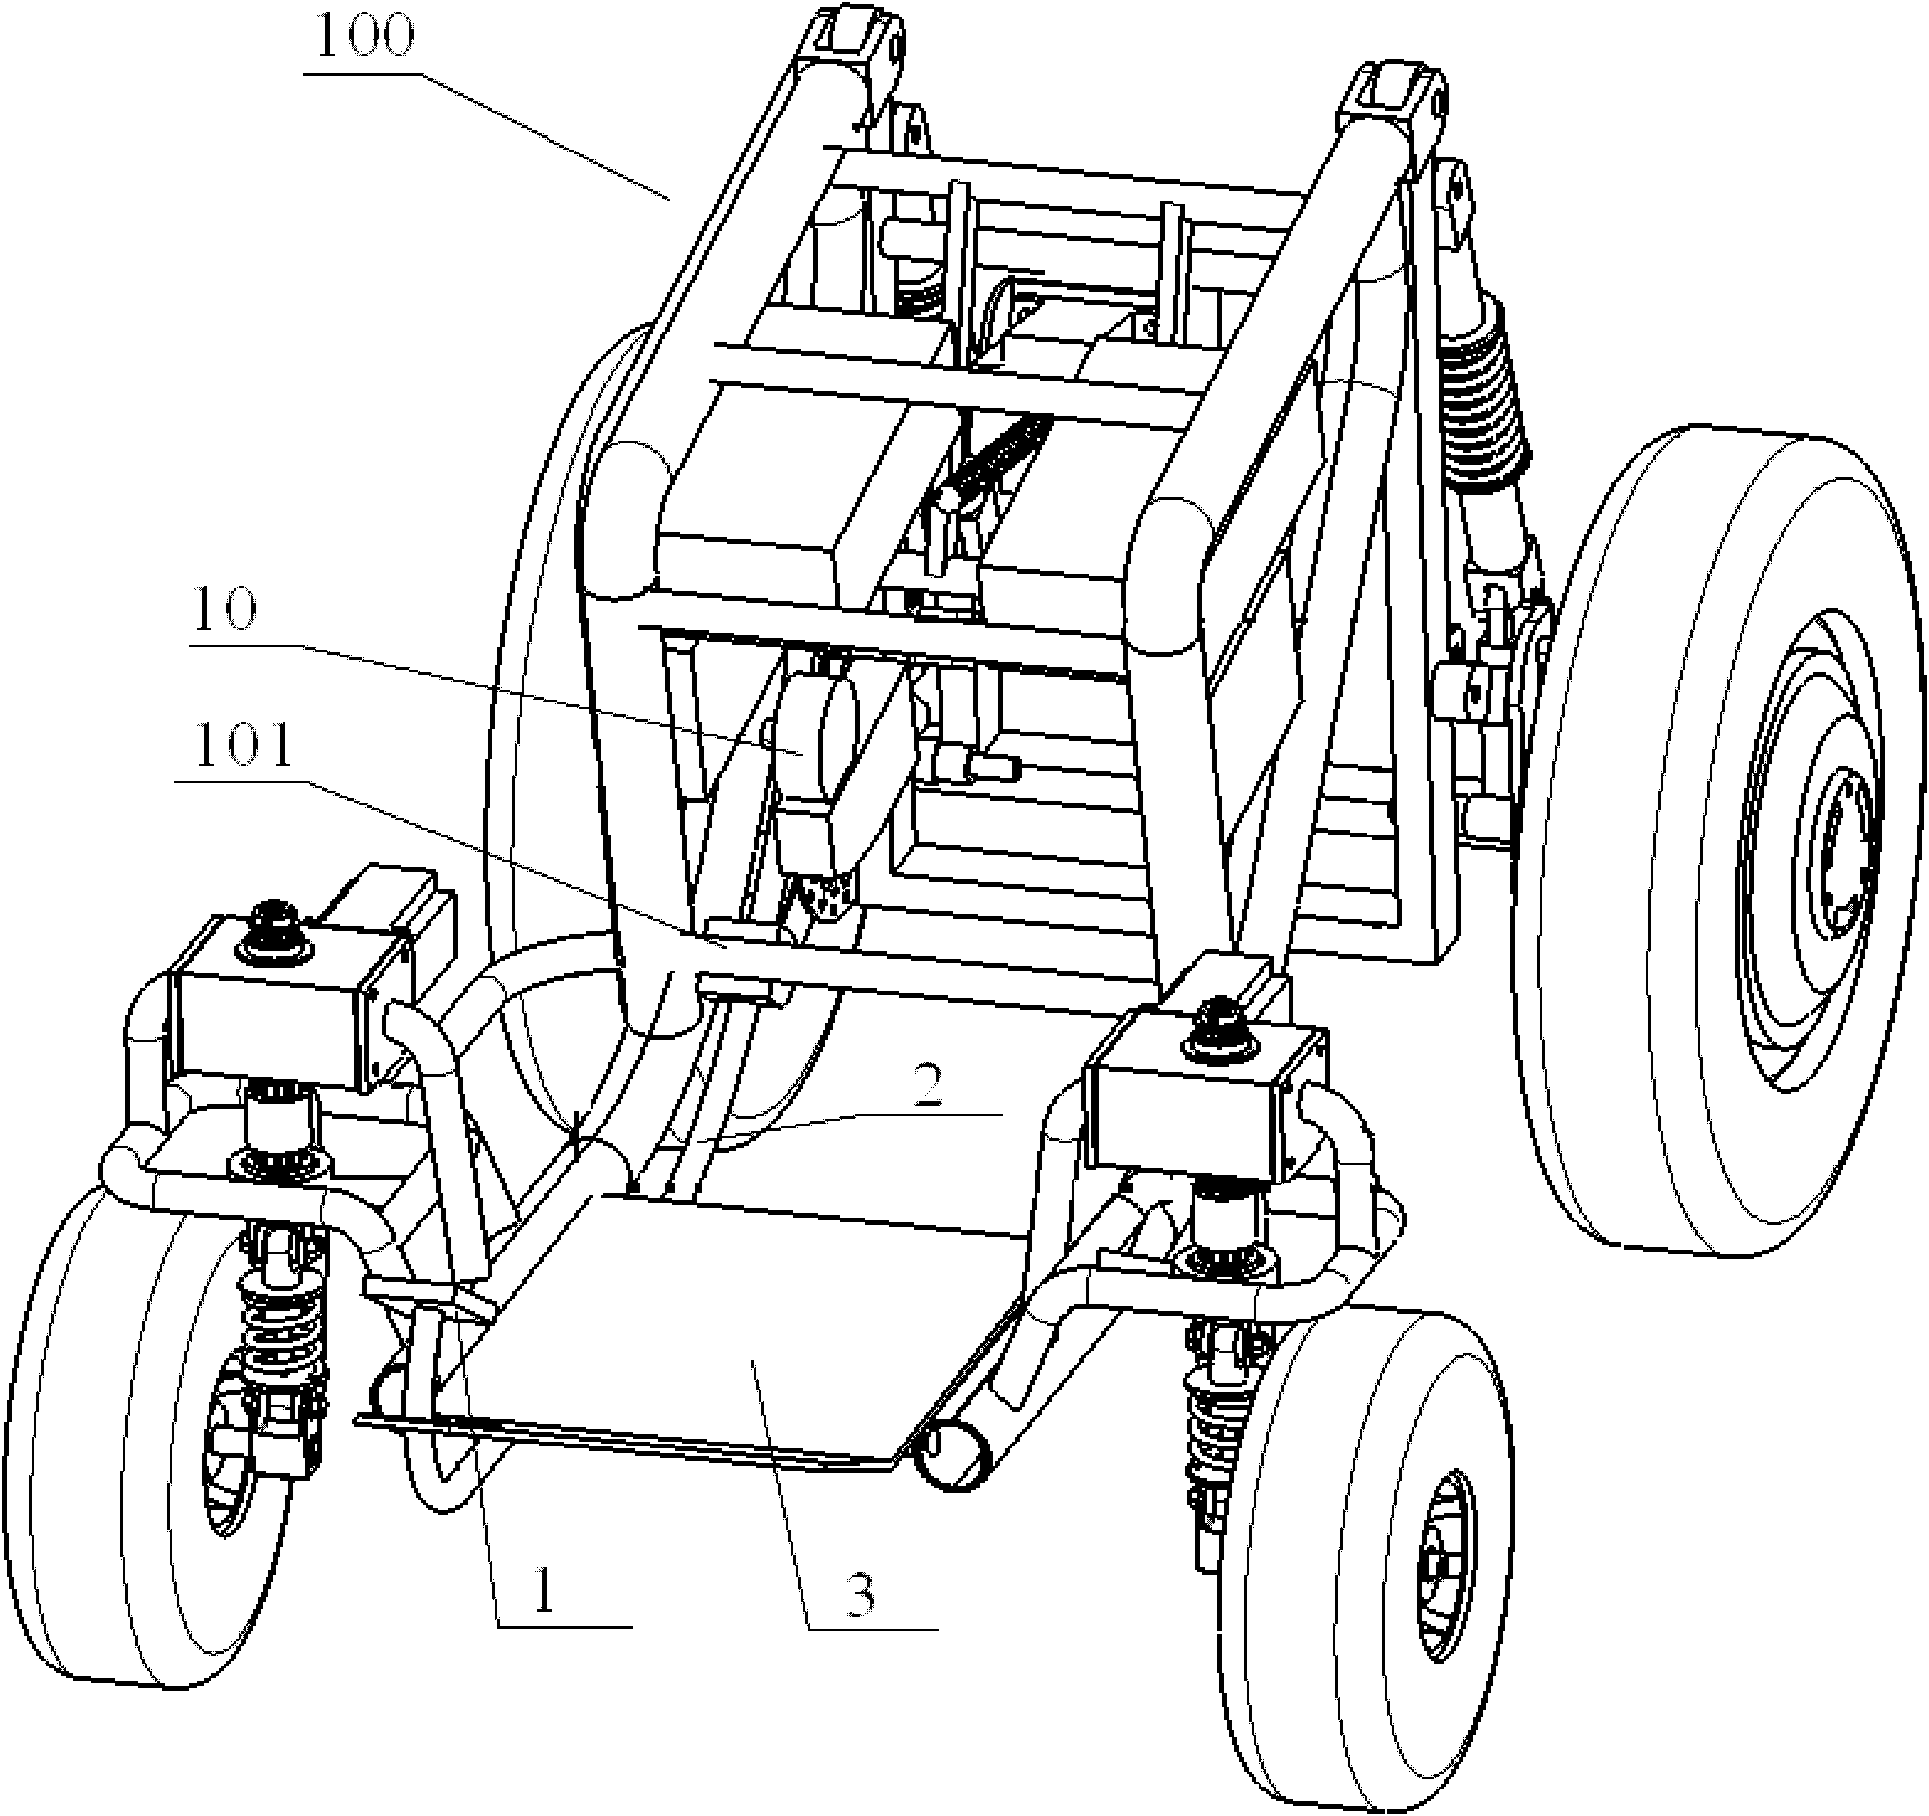 Manually-operated and linearly-controlled integrated brake system